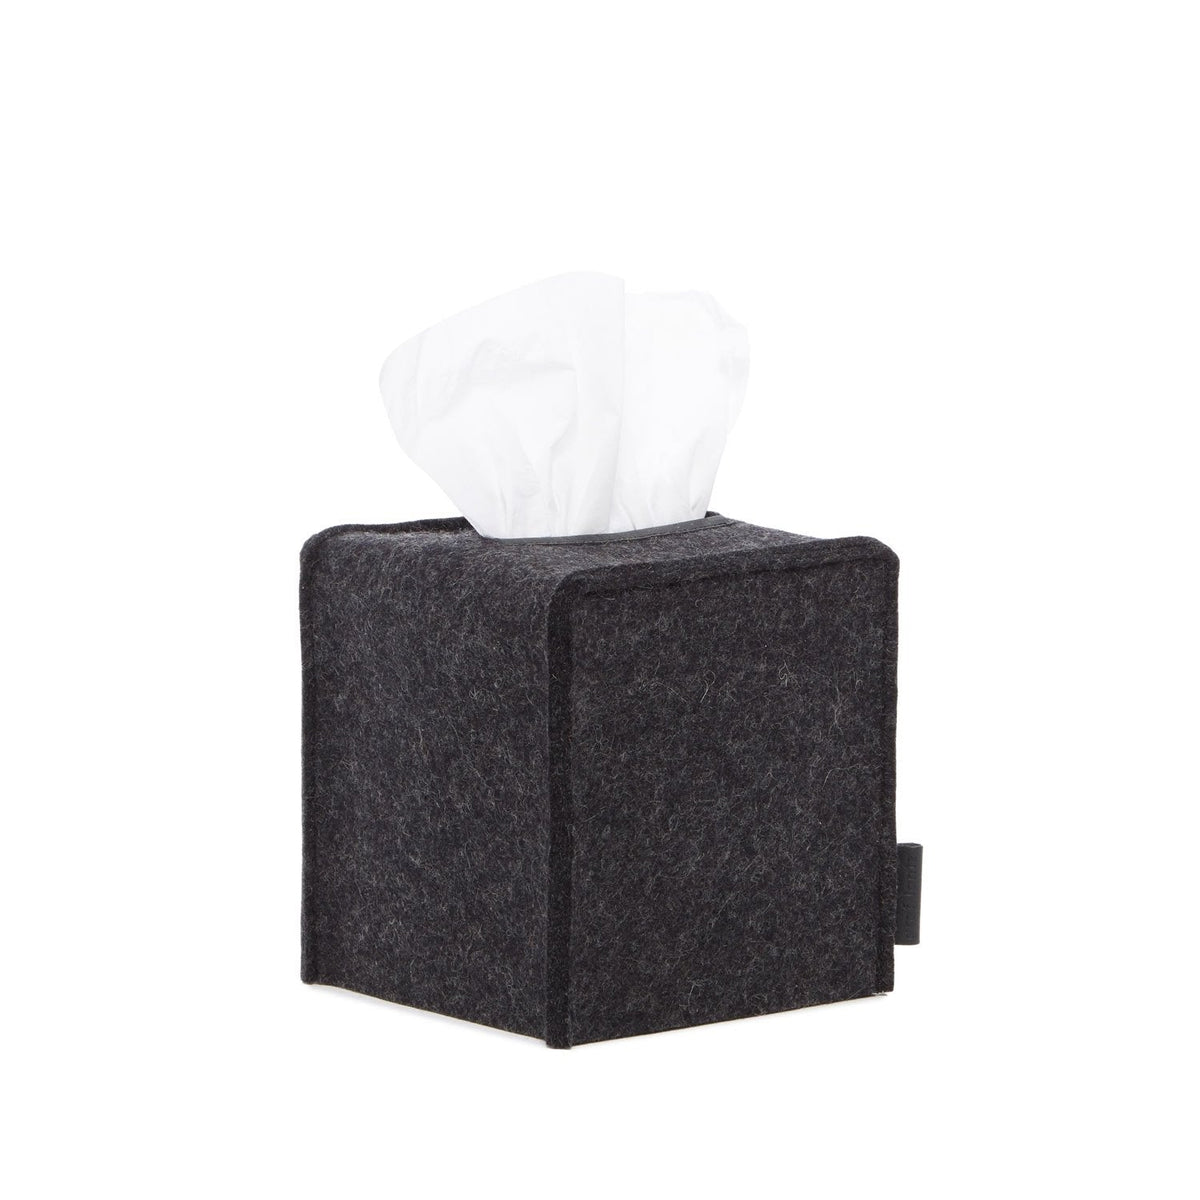 Tissue Box Cover Small - Charcoal